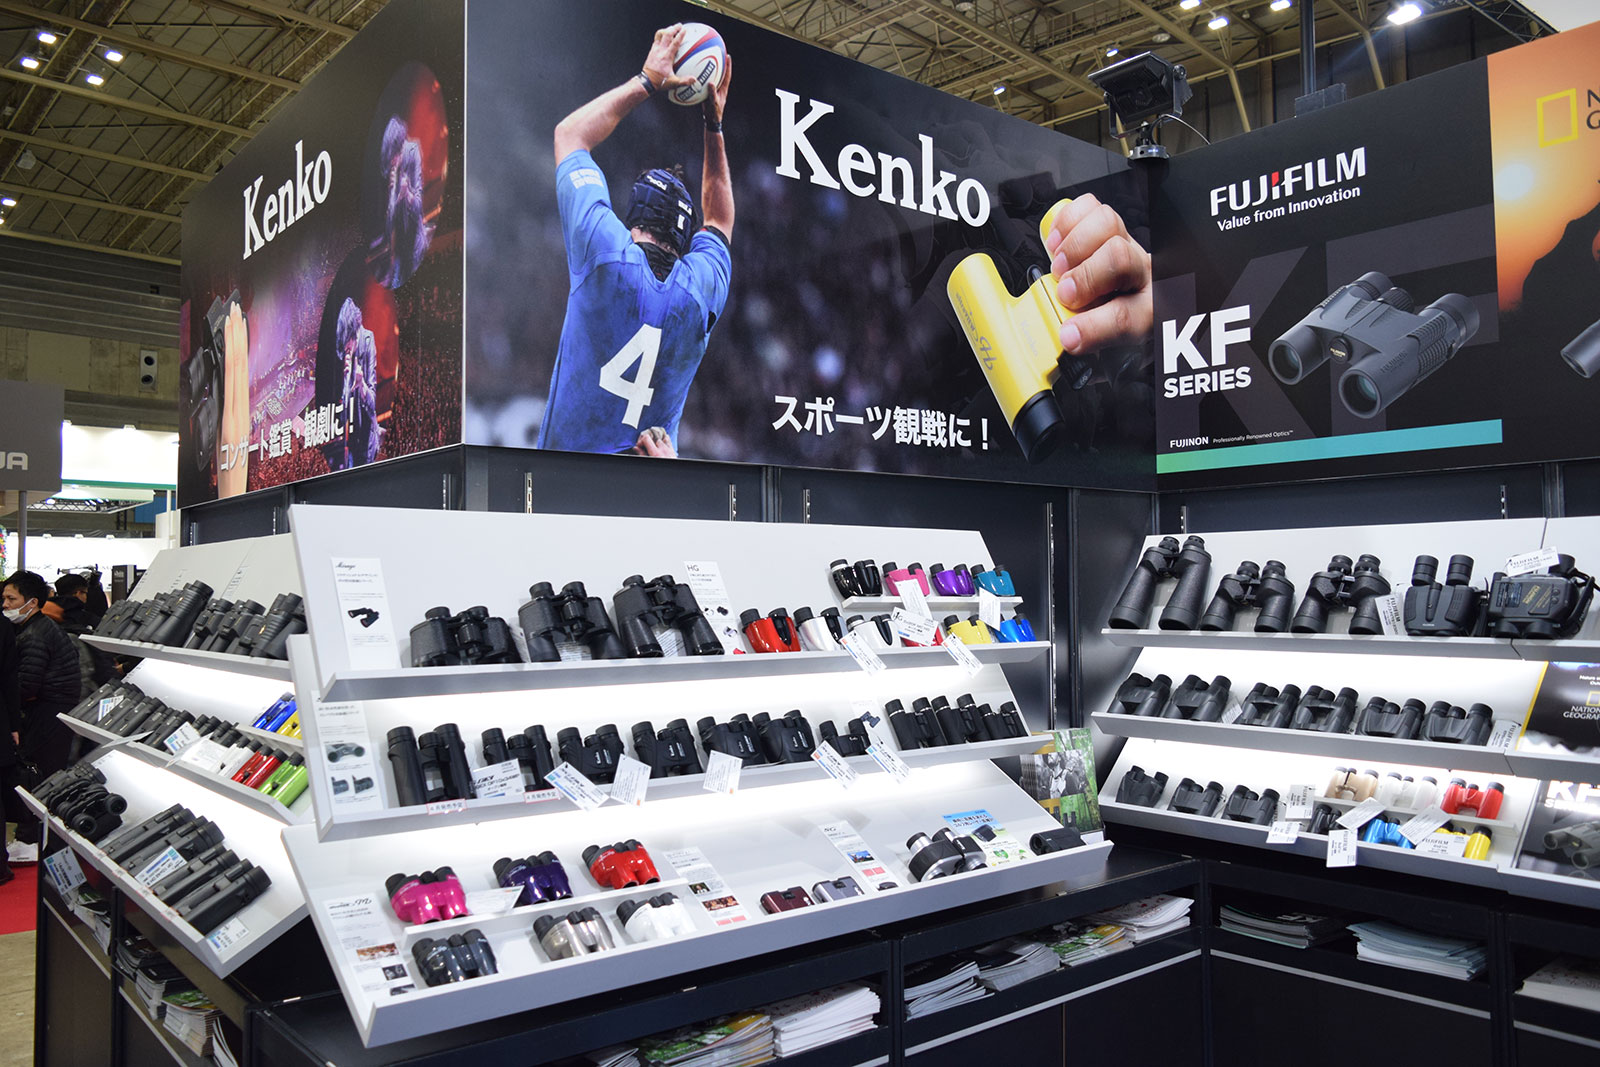 Along with monoculars, we also showcased a wide range of the our most popular Kenko binoculars series.